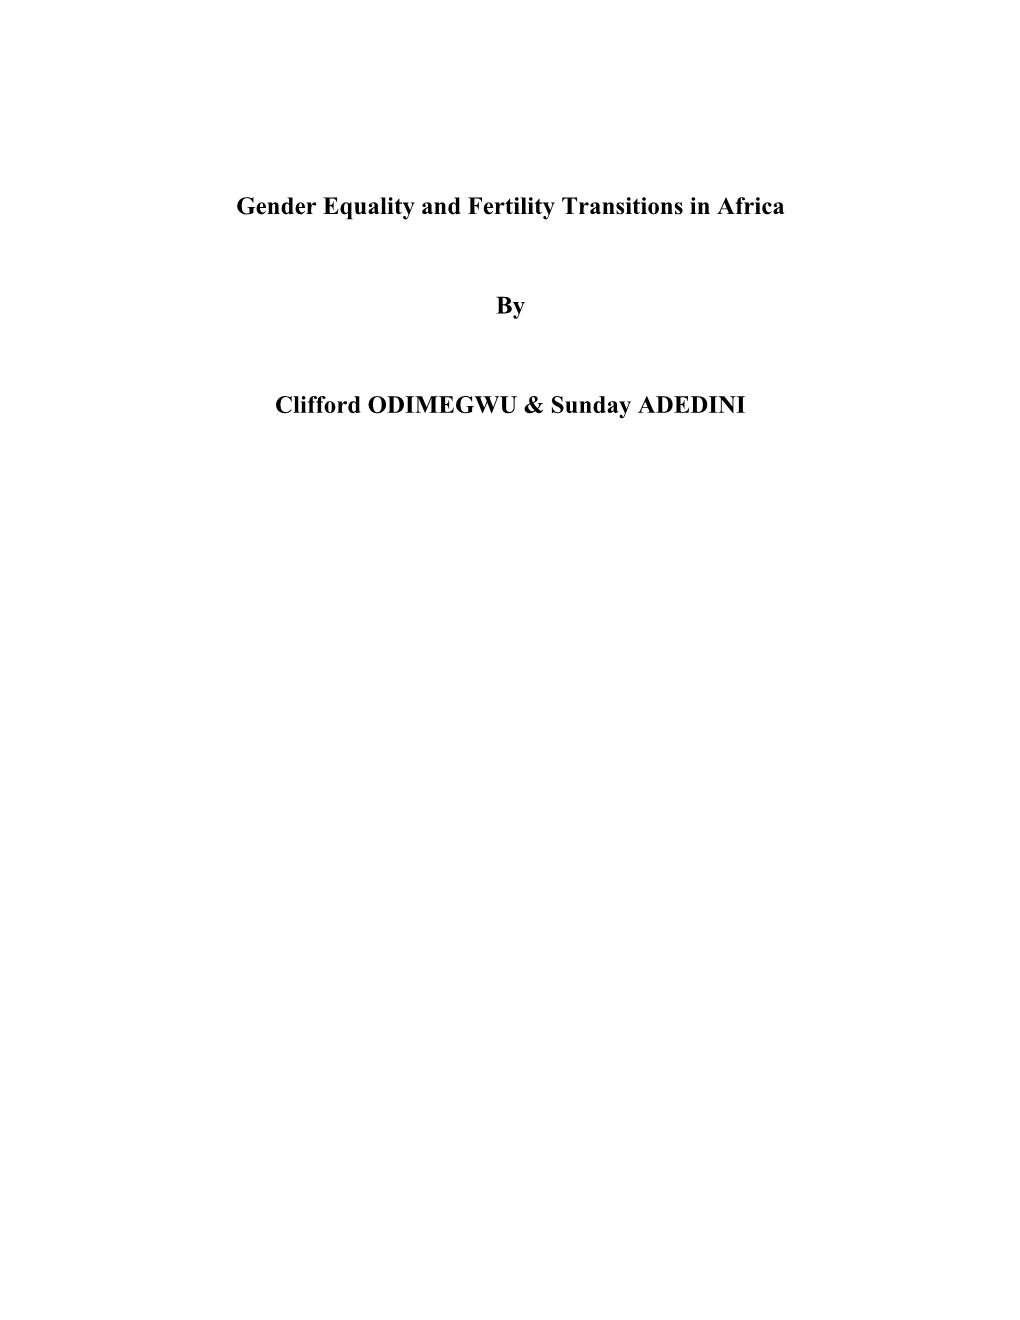 Gender Equality and Fertility Transitions in Africa by Clifford